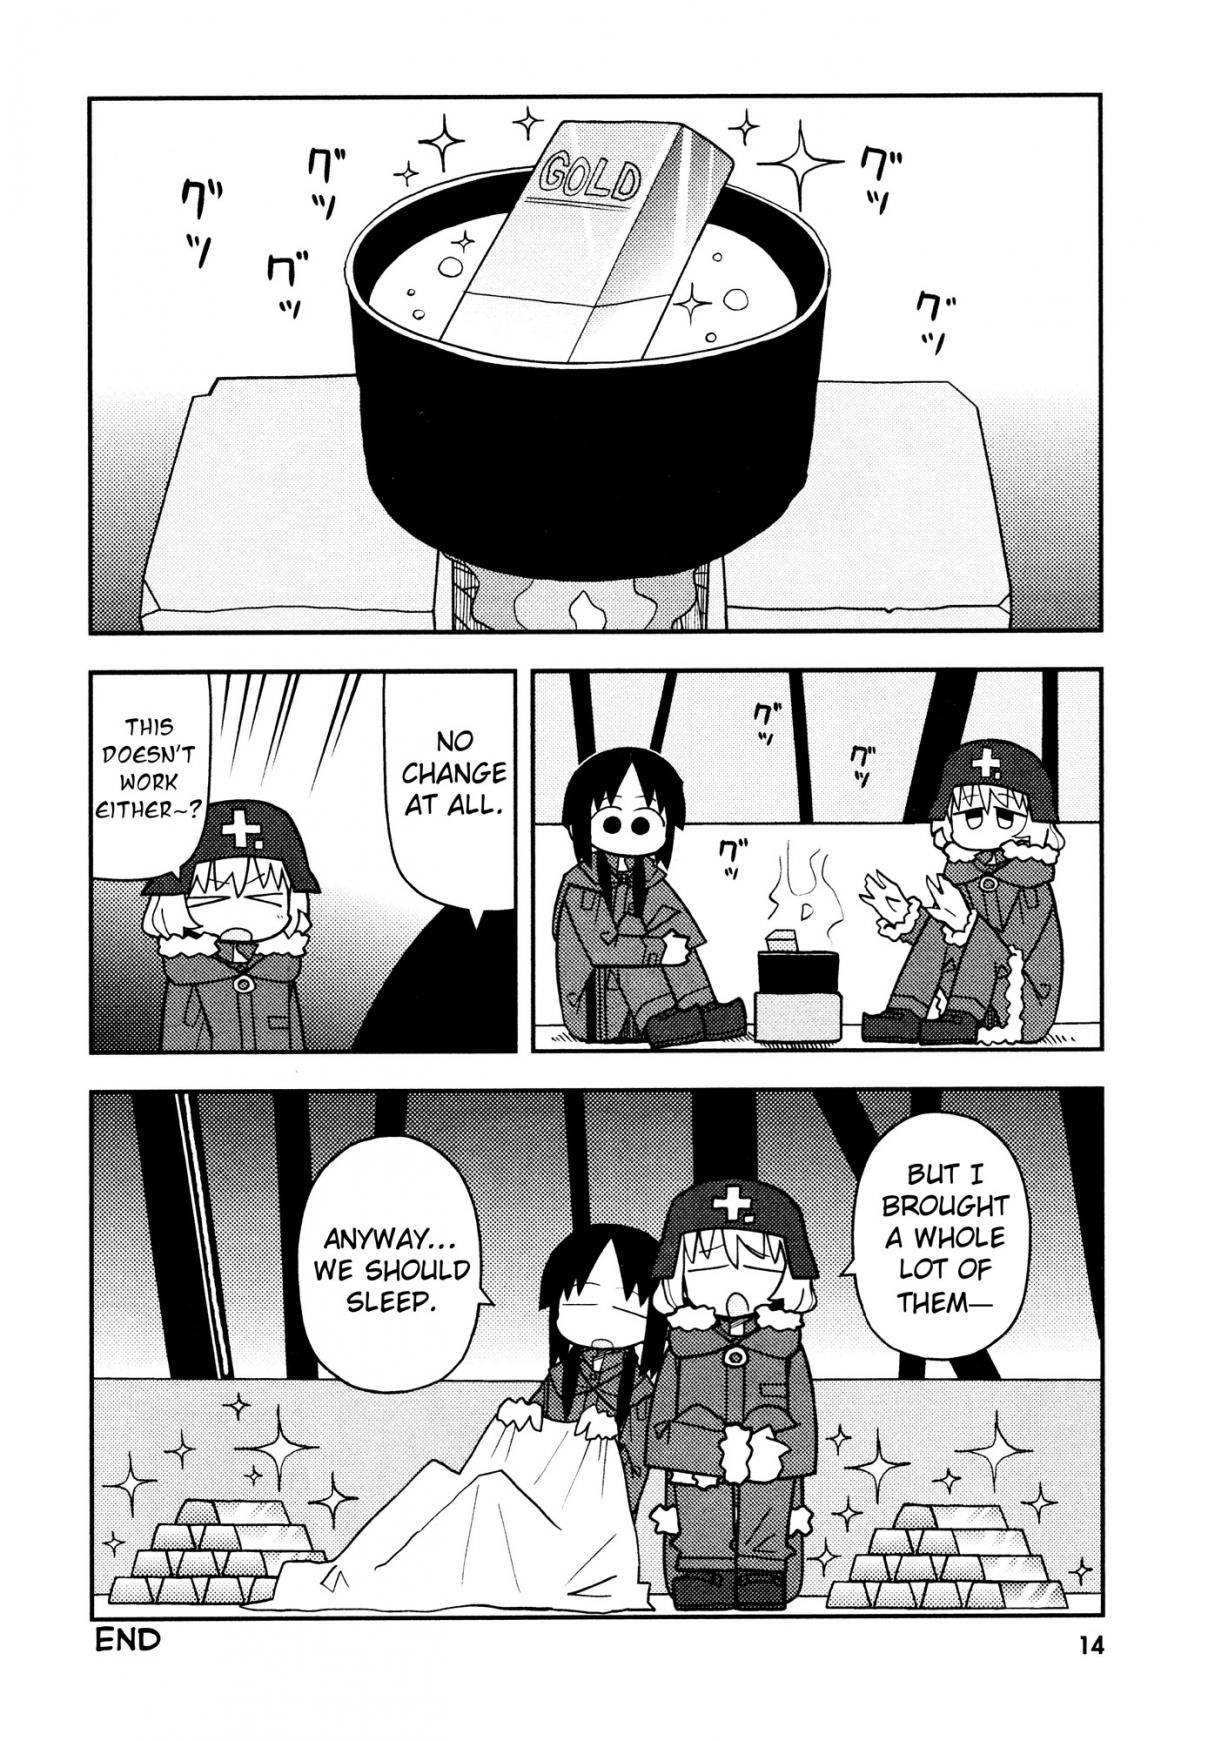 Girls' Last Tour Official Anthology Comic Ch. 1 Meals' Last Issue Hatopopoko